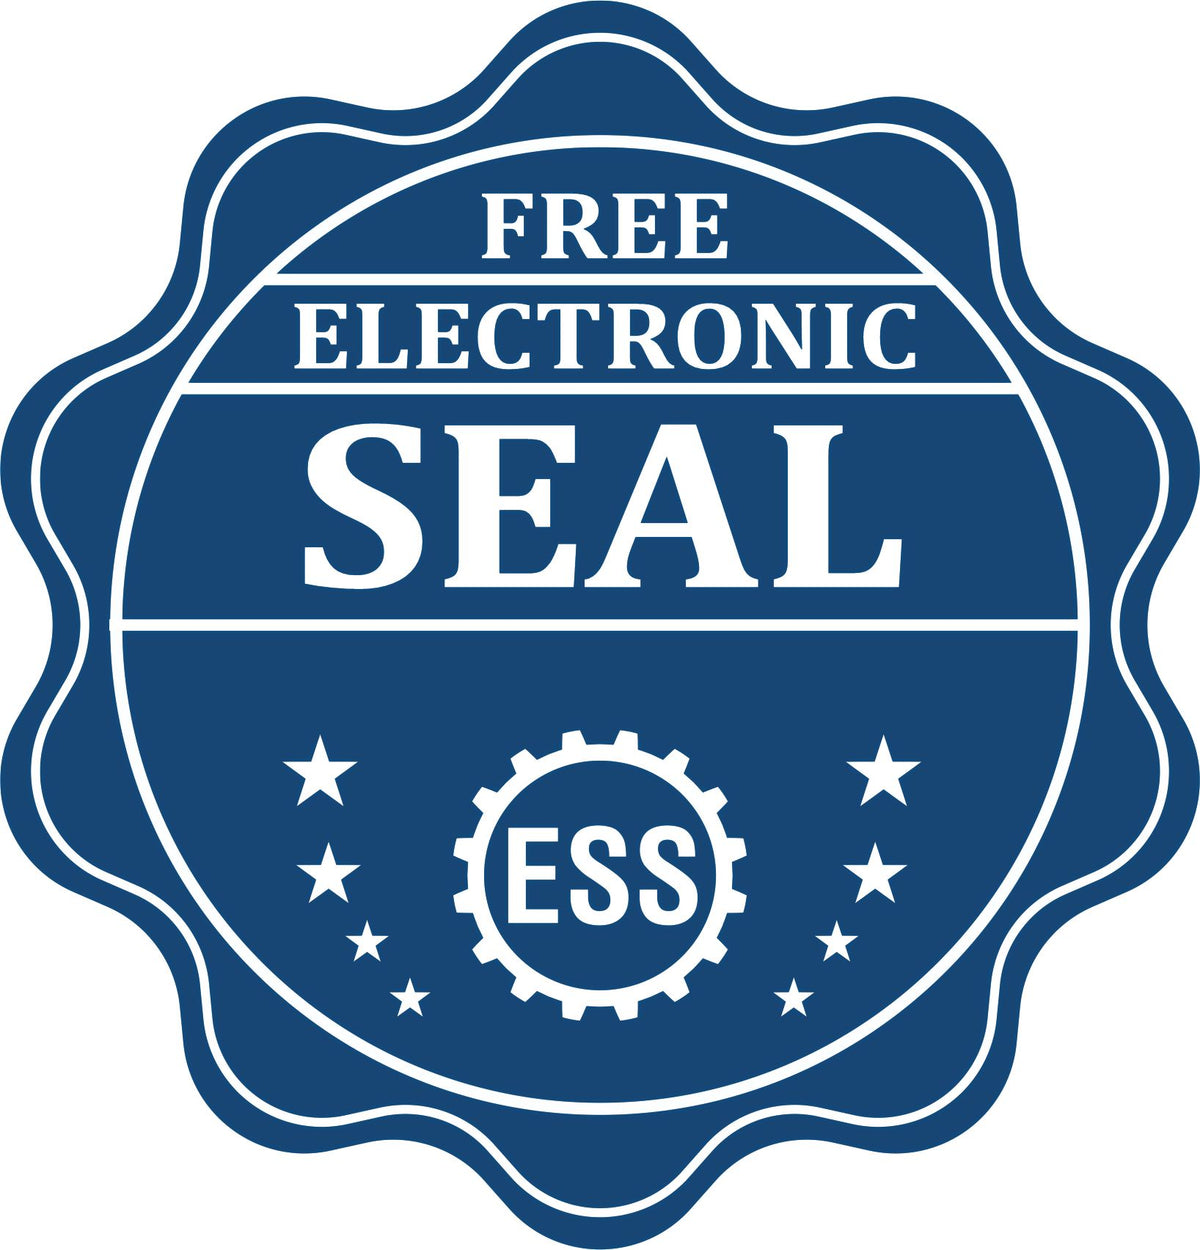 A badge showing a free electronic seal for the Hybrid District of Columbia Architect Seal with stars and the ESS gear on the emblem.